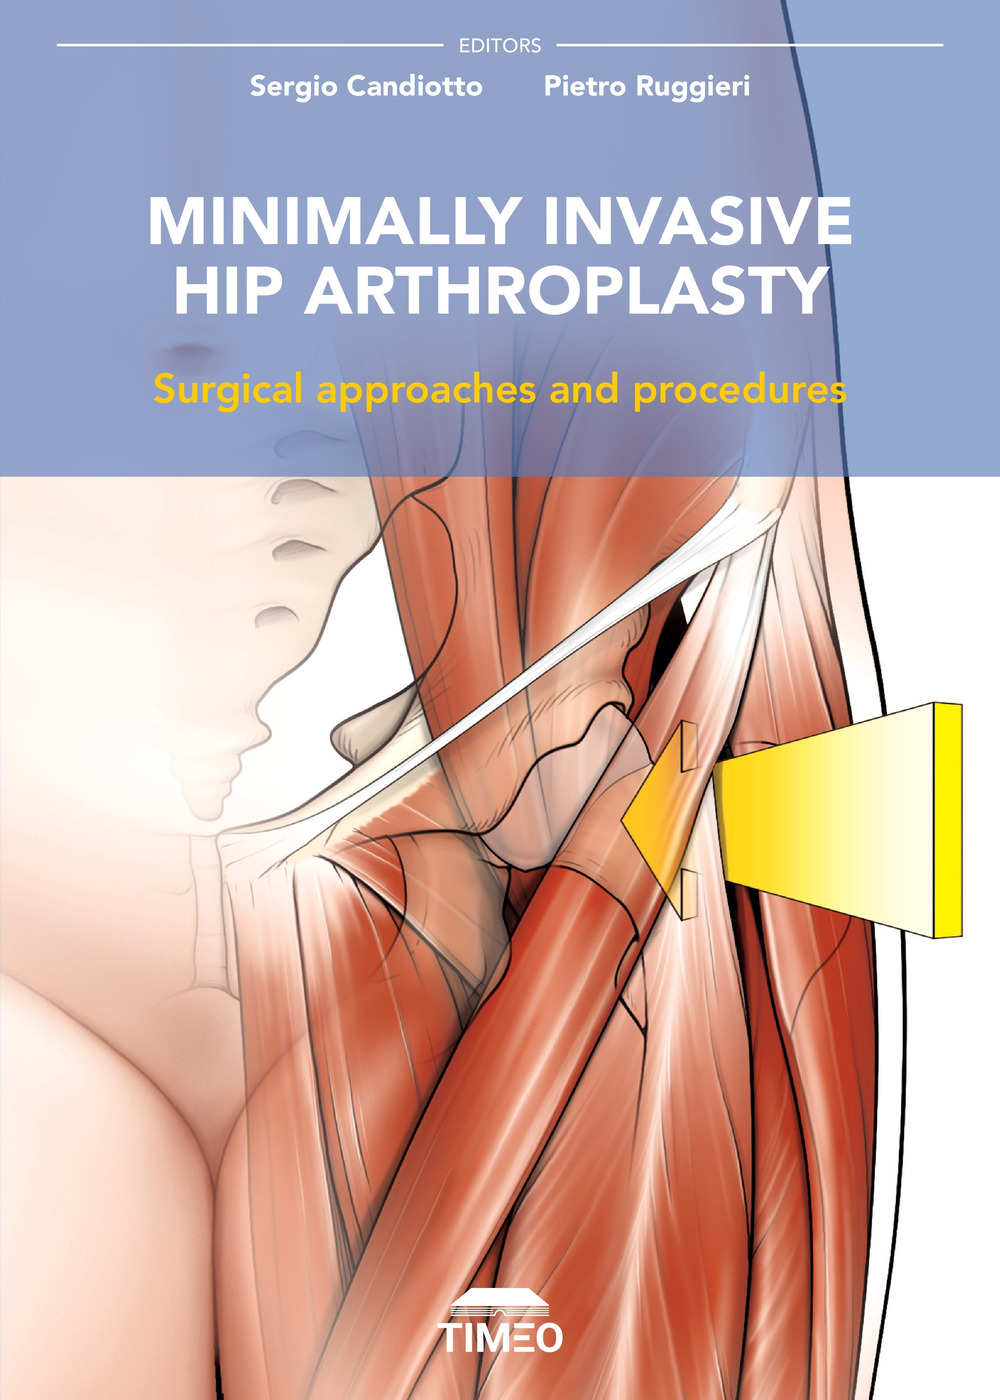 Minimally invasive hip arthroplasty. Surgical approaches and procedures